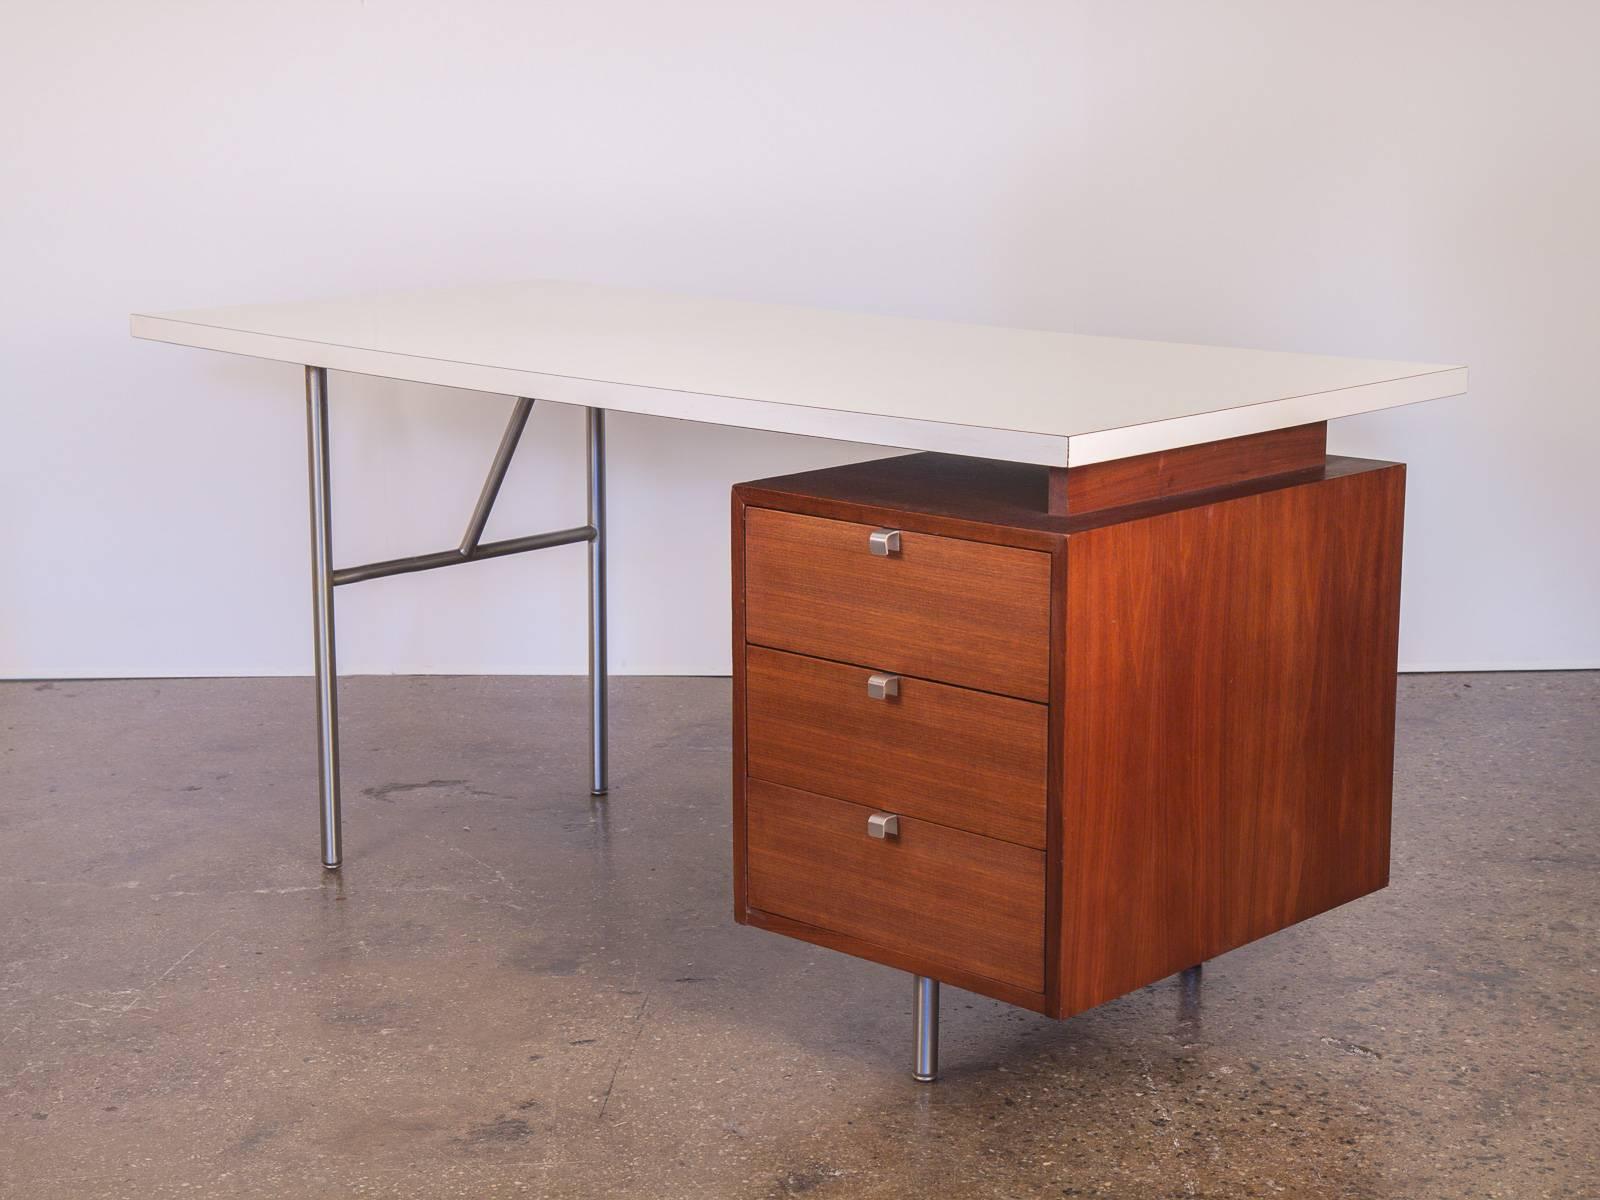 1960s Modular George Nelson Formica walnut desk with typewriter desk for Herman Miller. This system is in excellent vintage condition—all the wood has been polished and refreshed, the white Formica surface is clean and smooth. Adorned with the